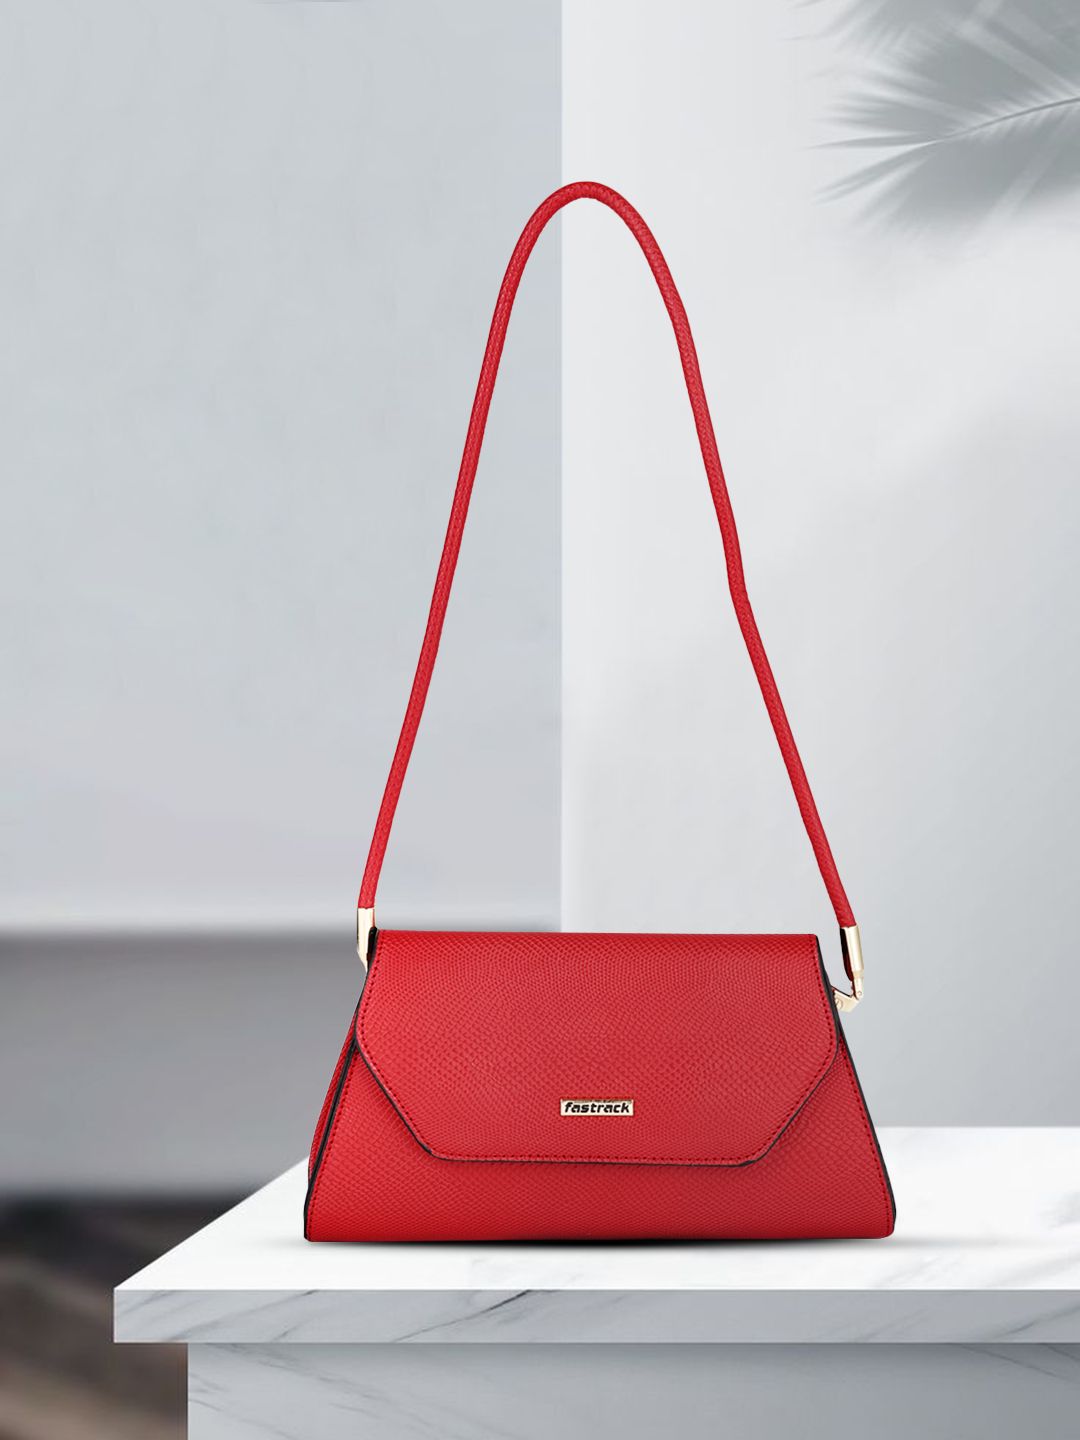 Fastrack Red Animal Textured Structured Shoulder Bag Price in India